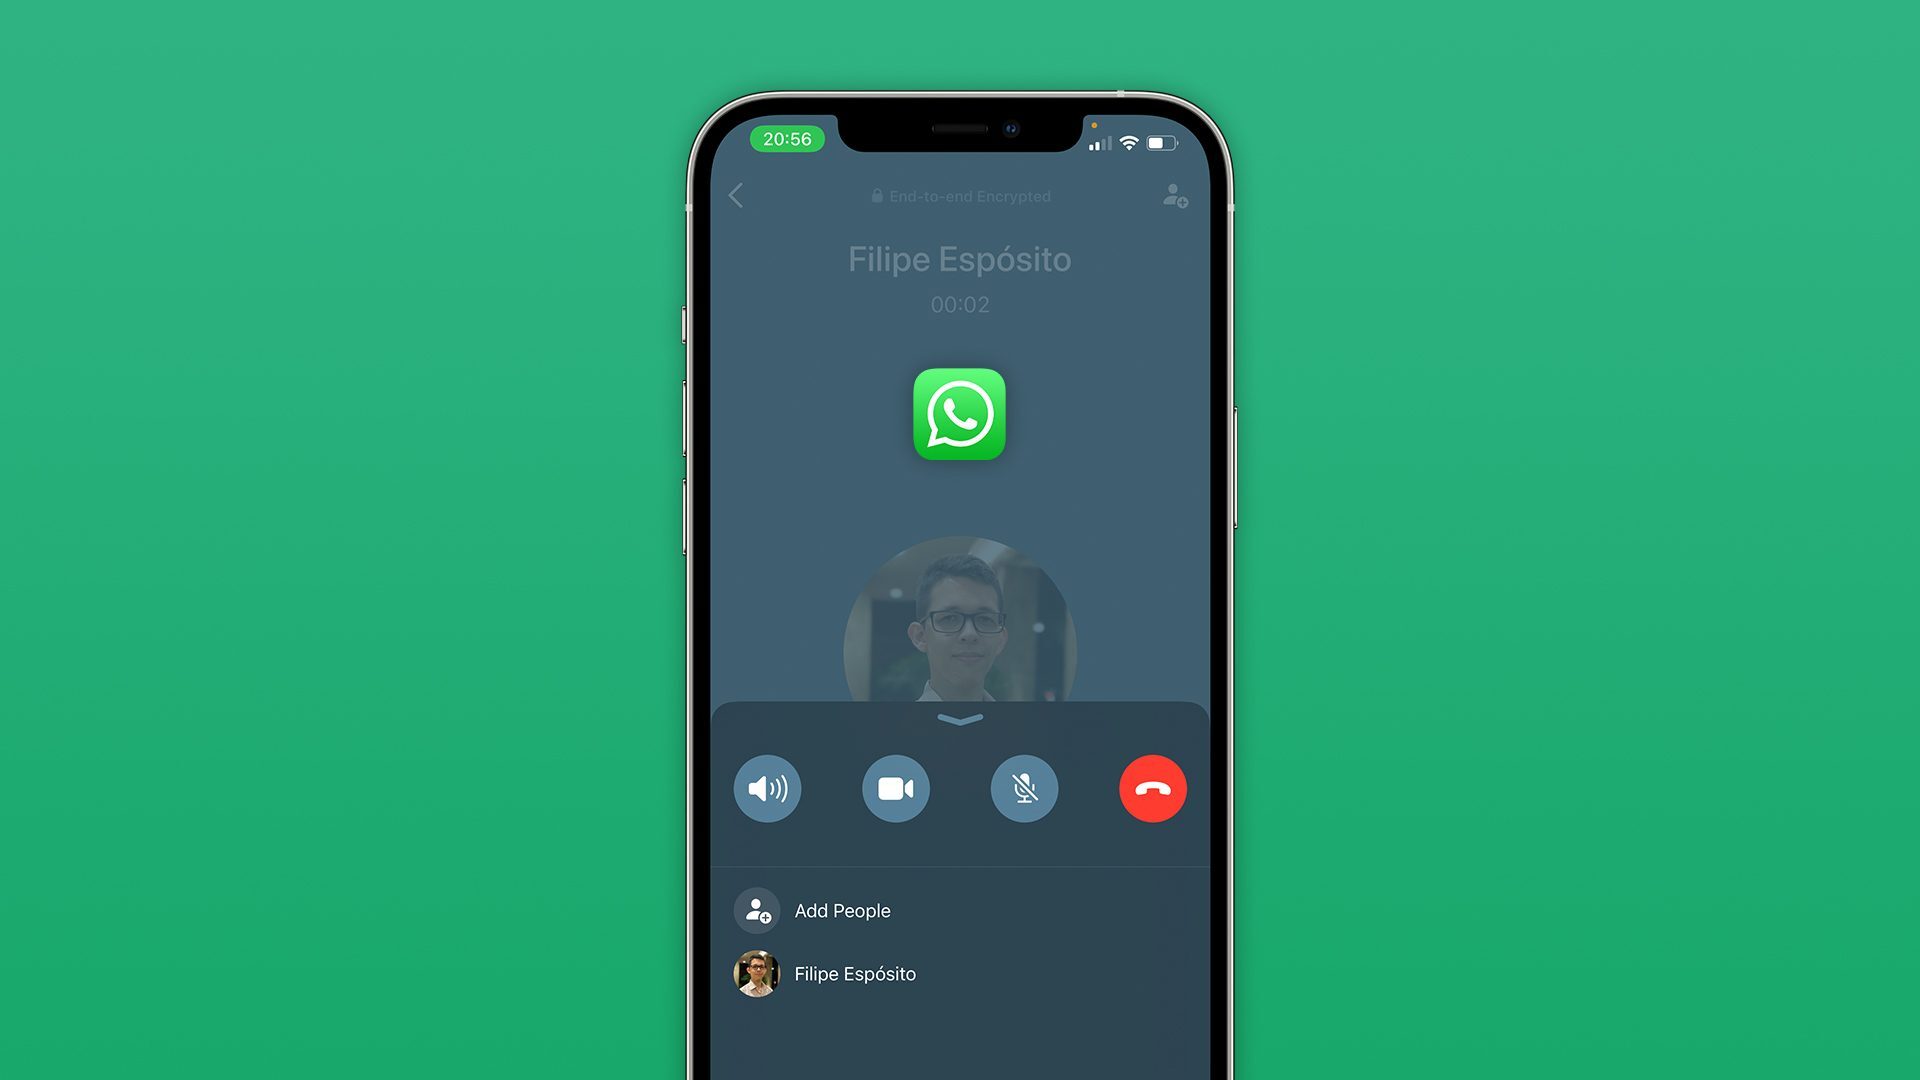 WhatsApp version 2.21.140 for iOS brings a new call interface - WhatsApp for iOS gets a redesigned call interface with new update